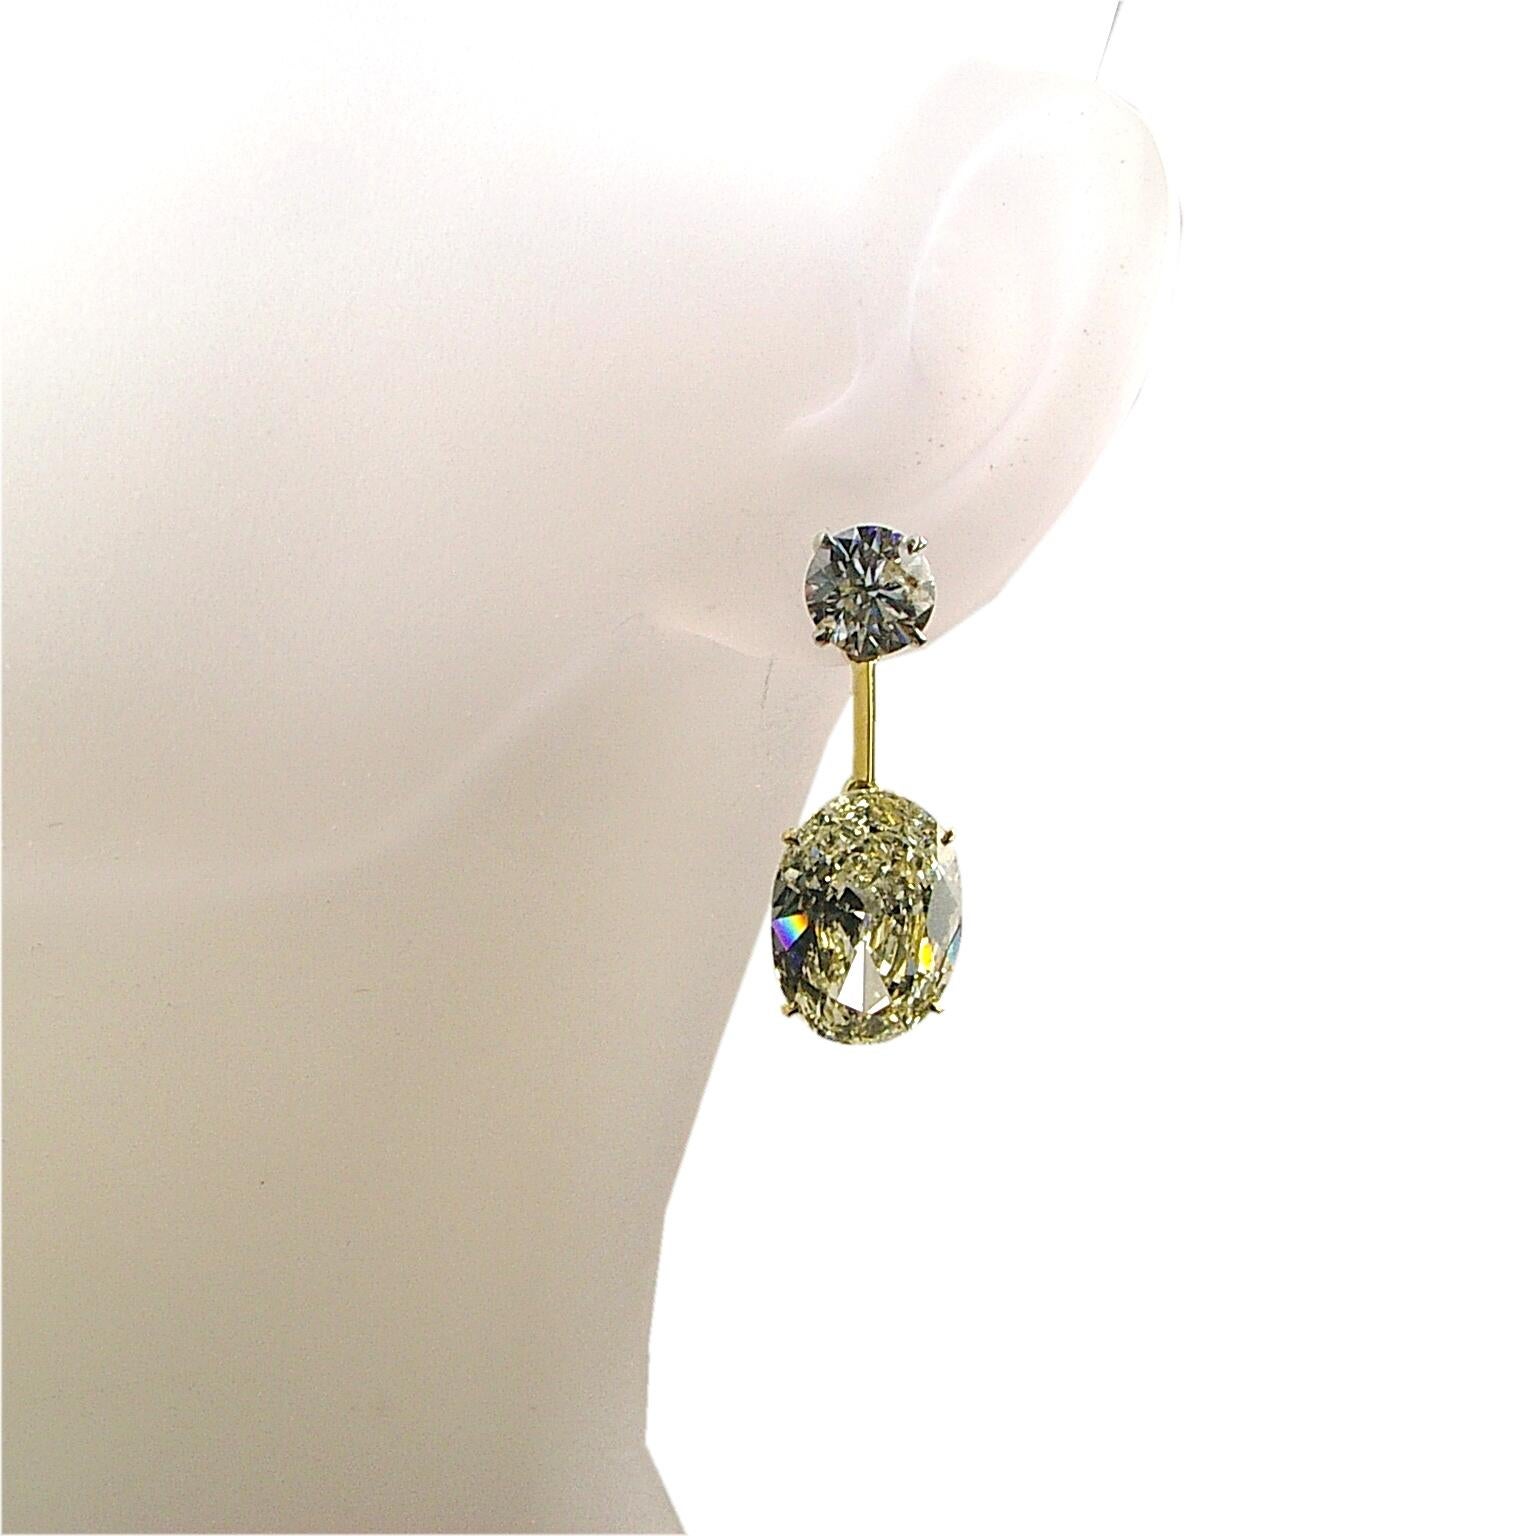 This 18K  beautiful dangling earring features 2 EGL certified Oval diamonds (5.00 & 5.02 Ct) Hanging off of a pair of Round Brilliant diamonds with total weight of 2.33 Ct. Look at the setting for the Oval diamonds that does not show any metal and